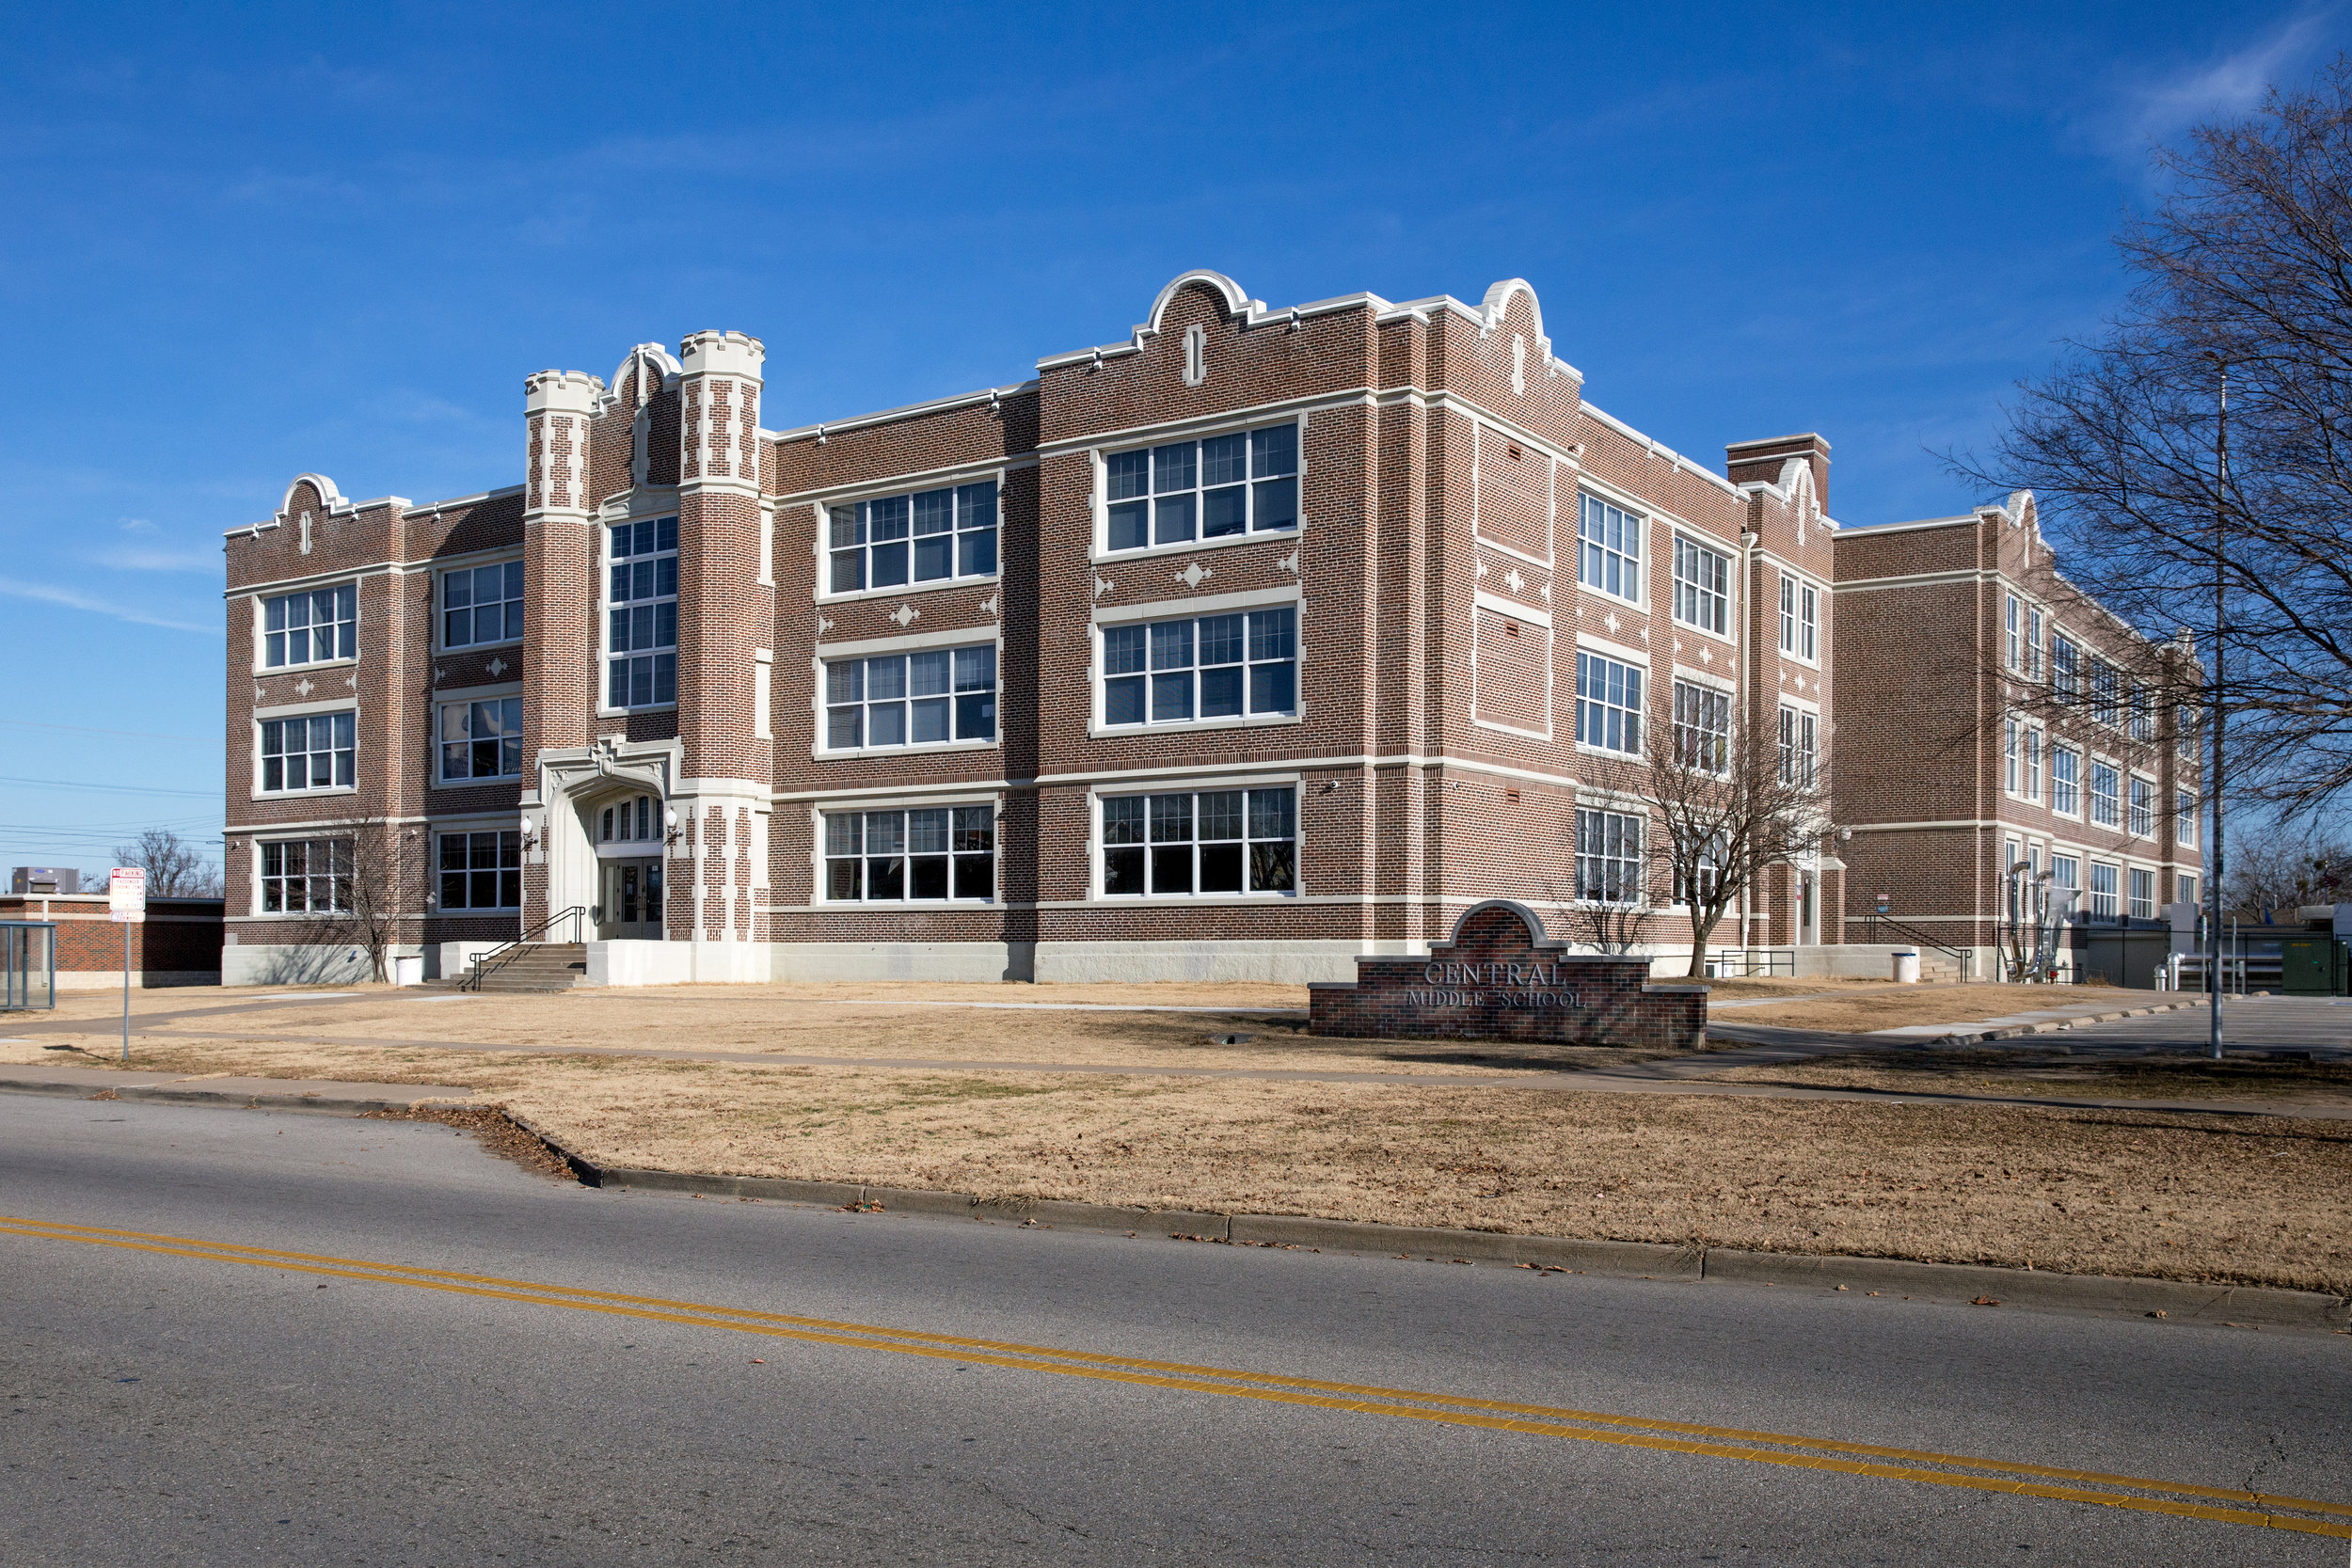 BPS - Central Middle School